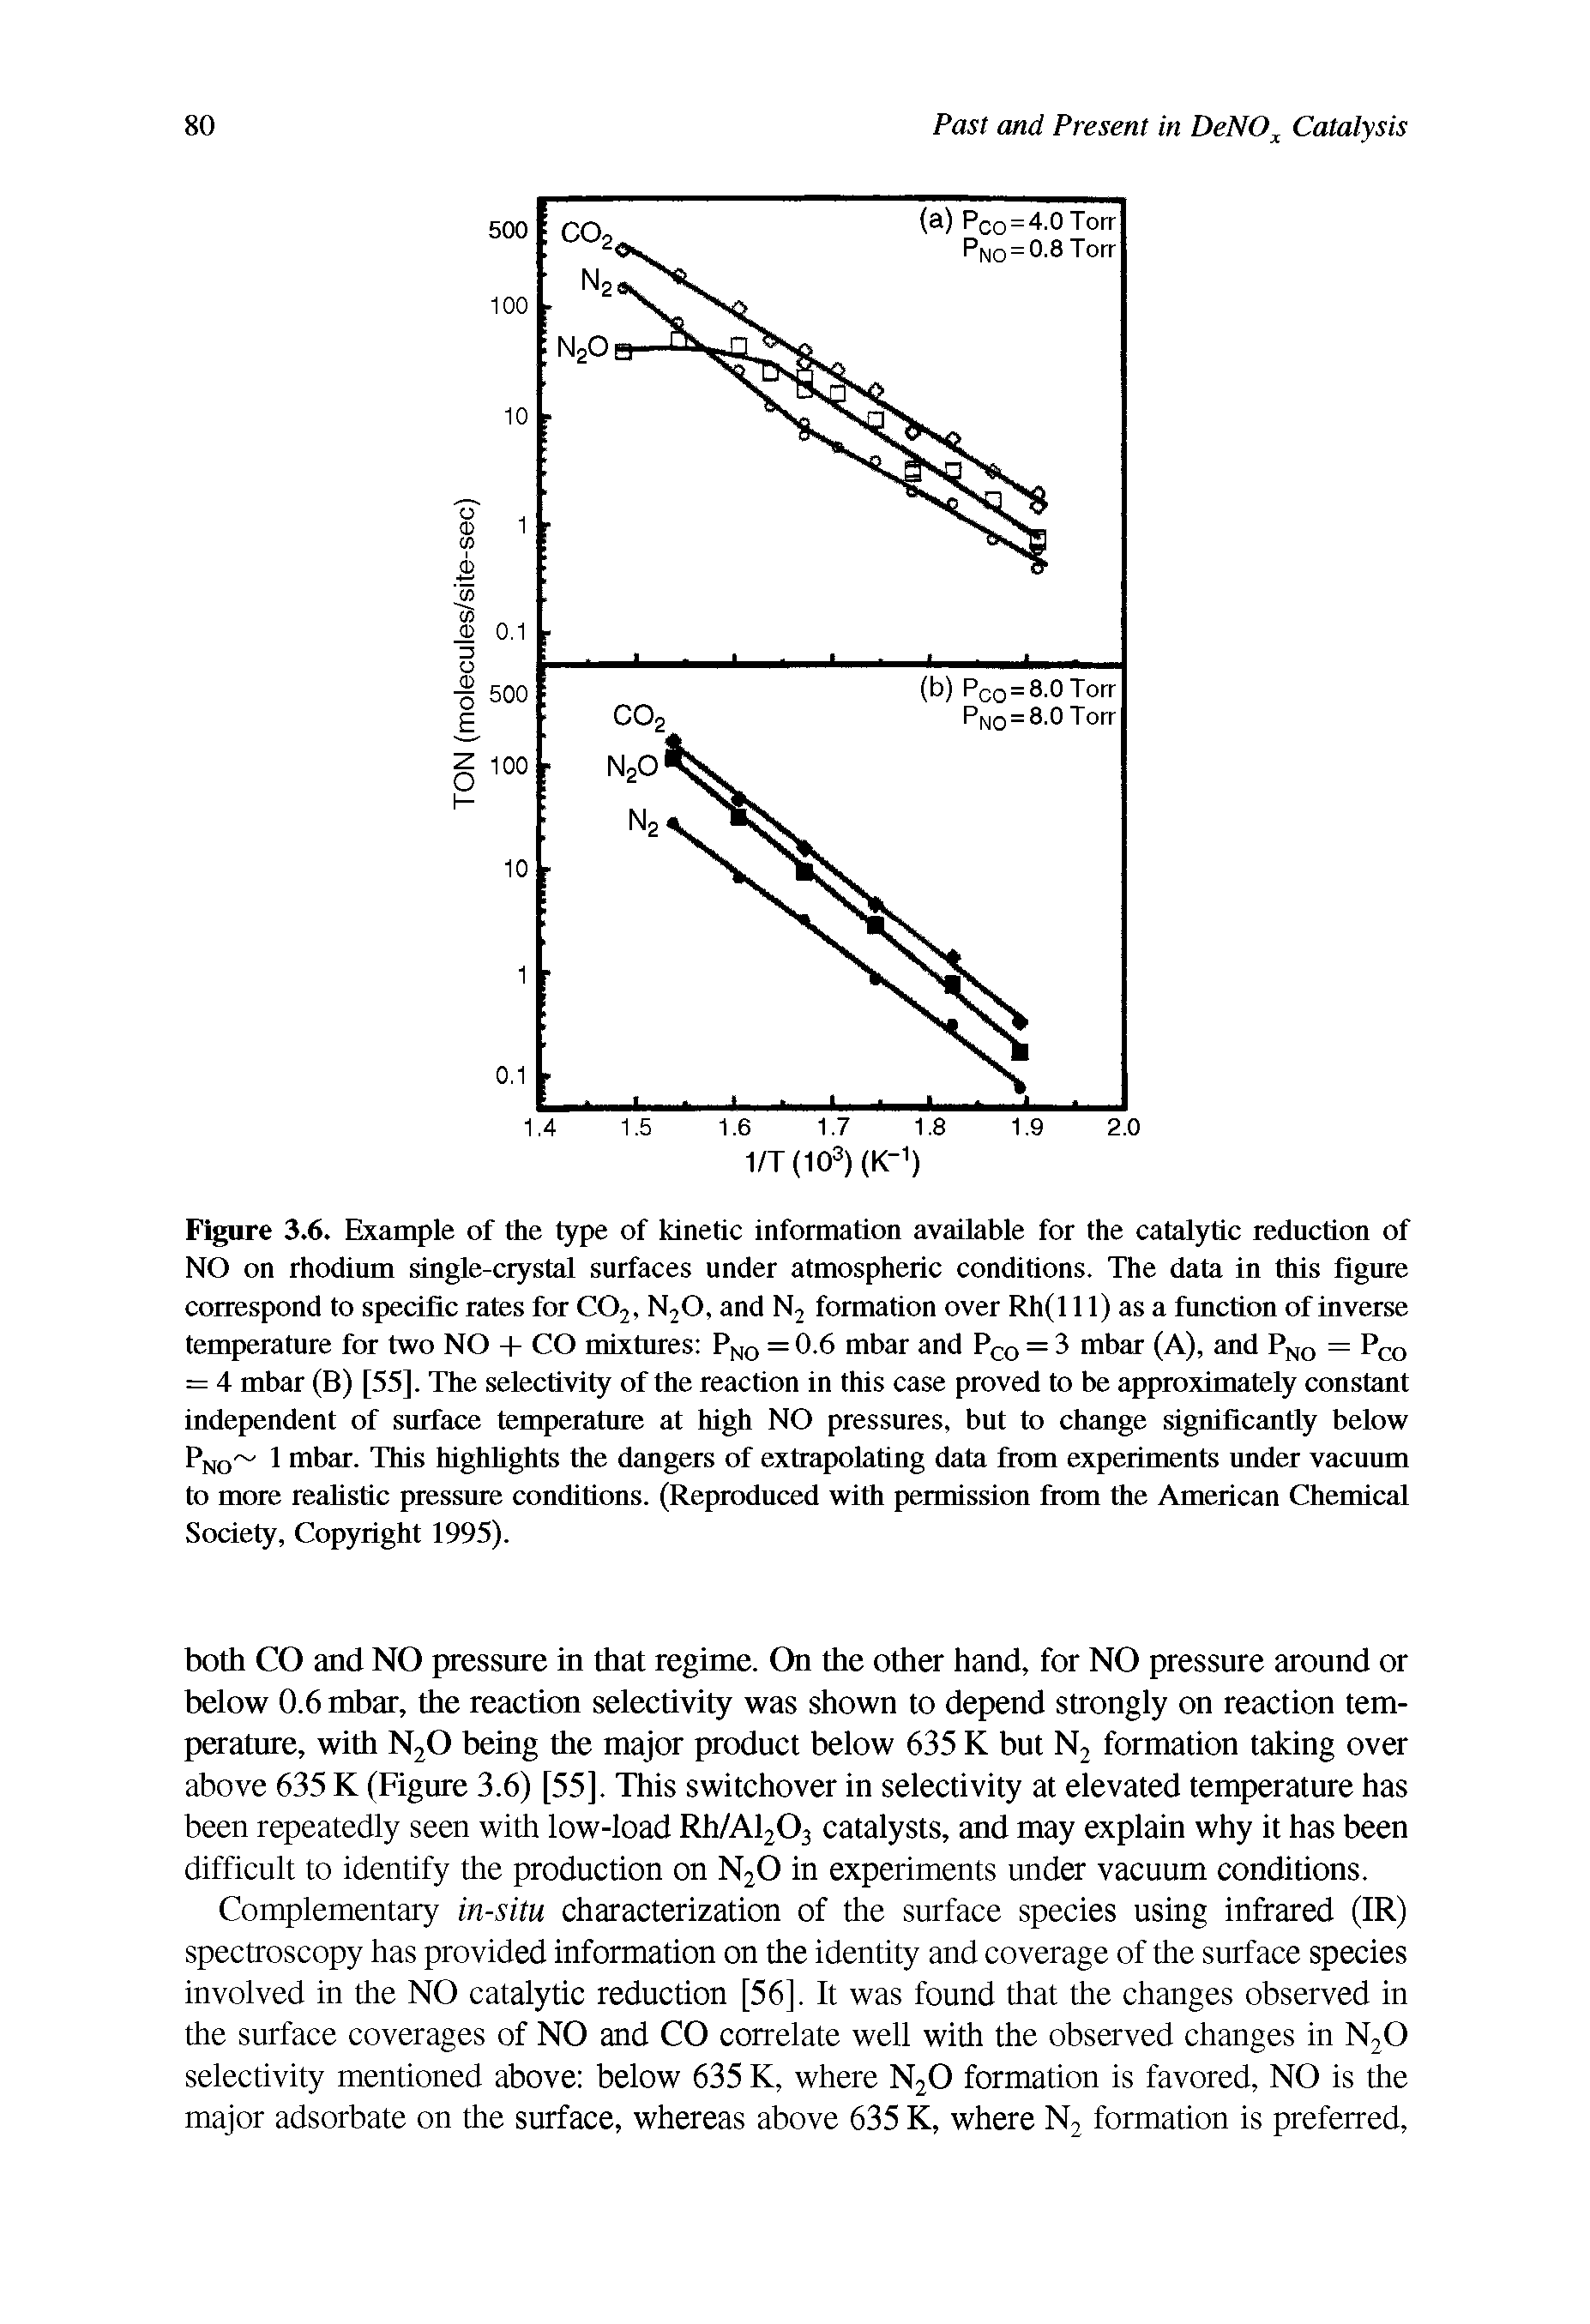 Figure 3.6. Example of the type of kinetic information available for the catalytic reduction of NO on rhodium single-crystal surfaces under atmospheric conditions. The data in this figure correspond to specific rates for C02, N20, and N2 formation over Rh(l 11) as a function of inverse temperature for two NO + CO mixtures PNO = 0.6 mbar and Pco — 3 mbar (A), and Pno — Pco = 4 mbar (B) [55]. The selectivity of the reaction in this case proved to be approximately constant independent of surface temperature at high NO pressures, but to change significantly below Pno 1 mbar. This highlights the dangers of extrapolating data from experiments under vacuum to more realistic pressure conditions. (Reproduced with permission from the American Chemical Society, Copyright 1995).